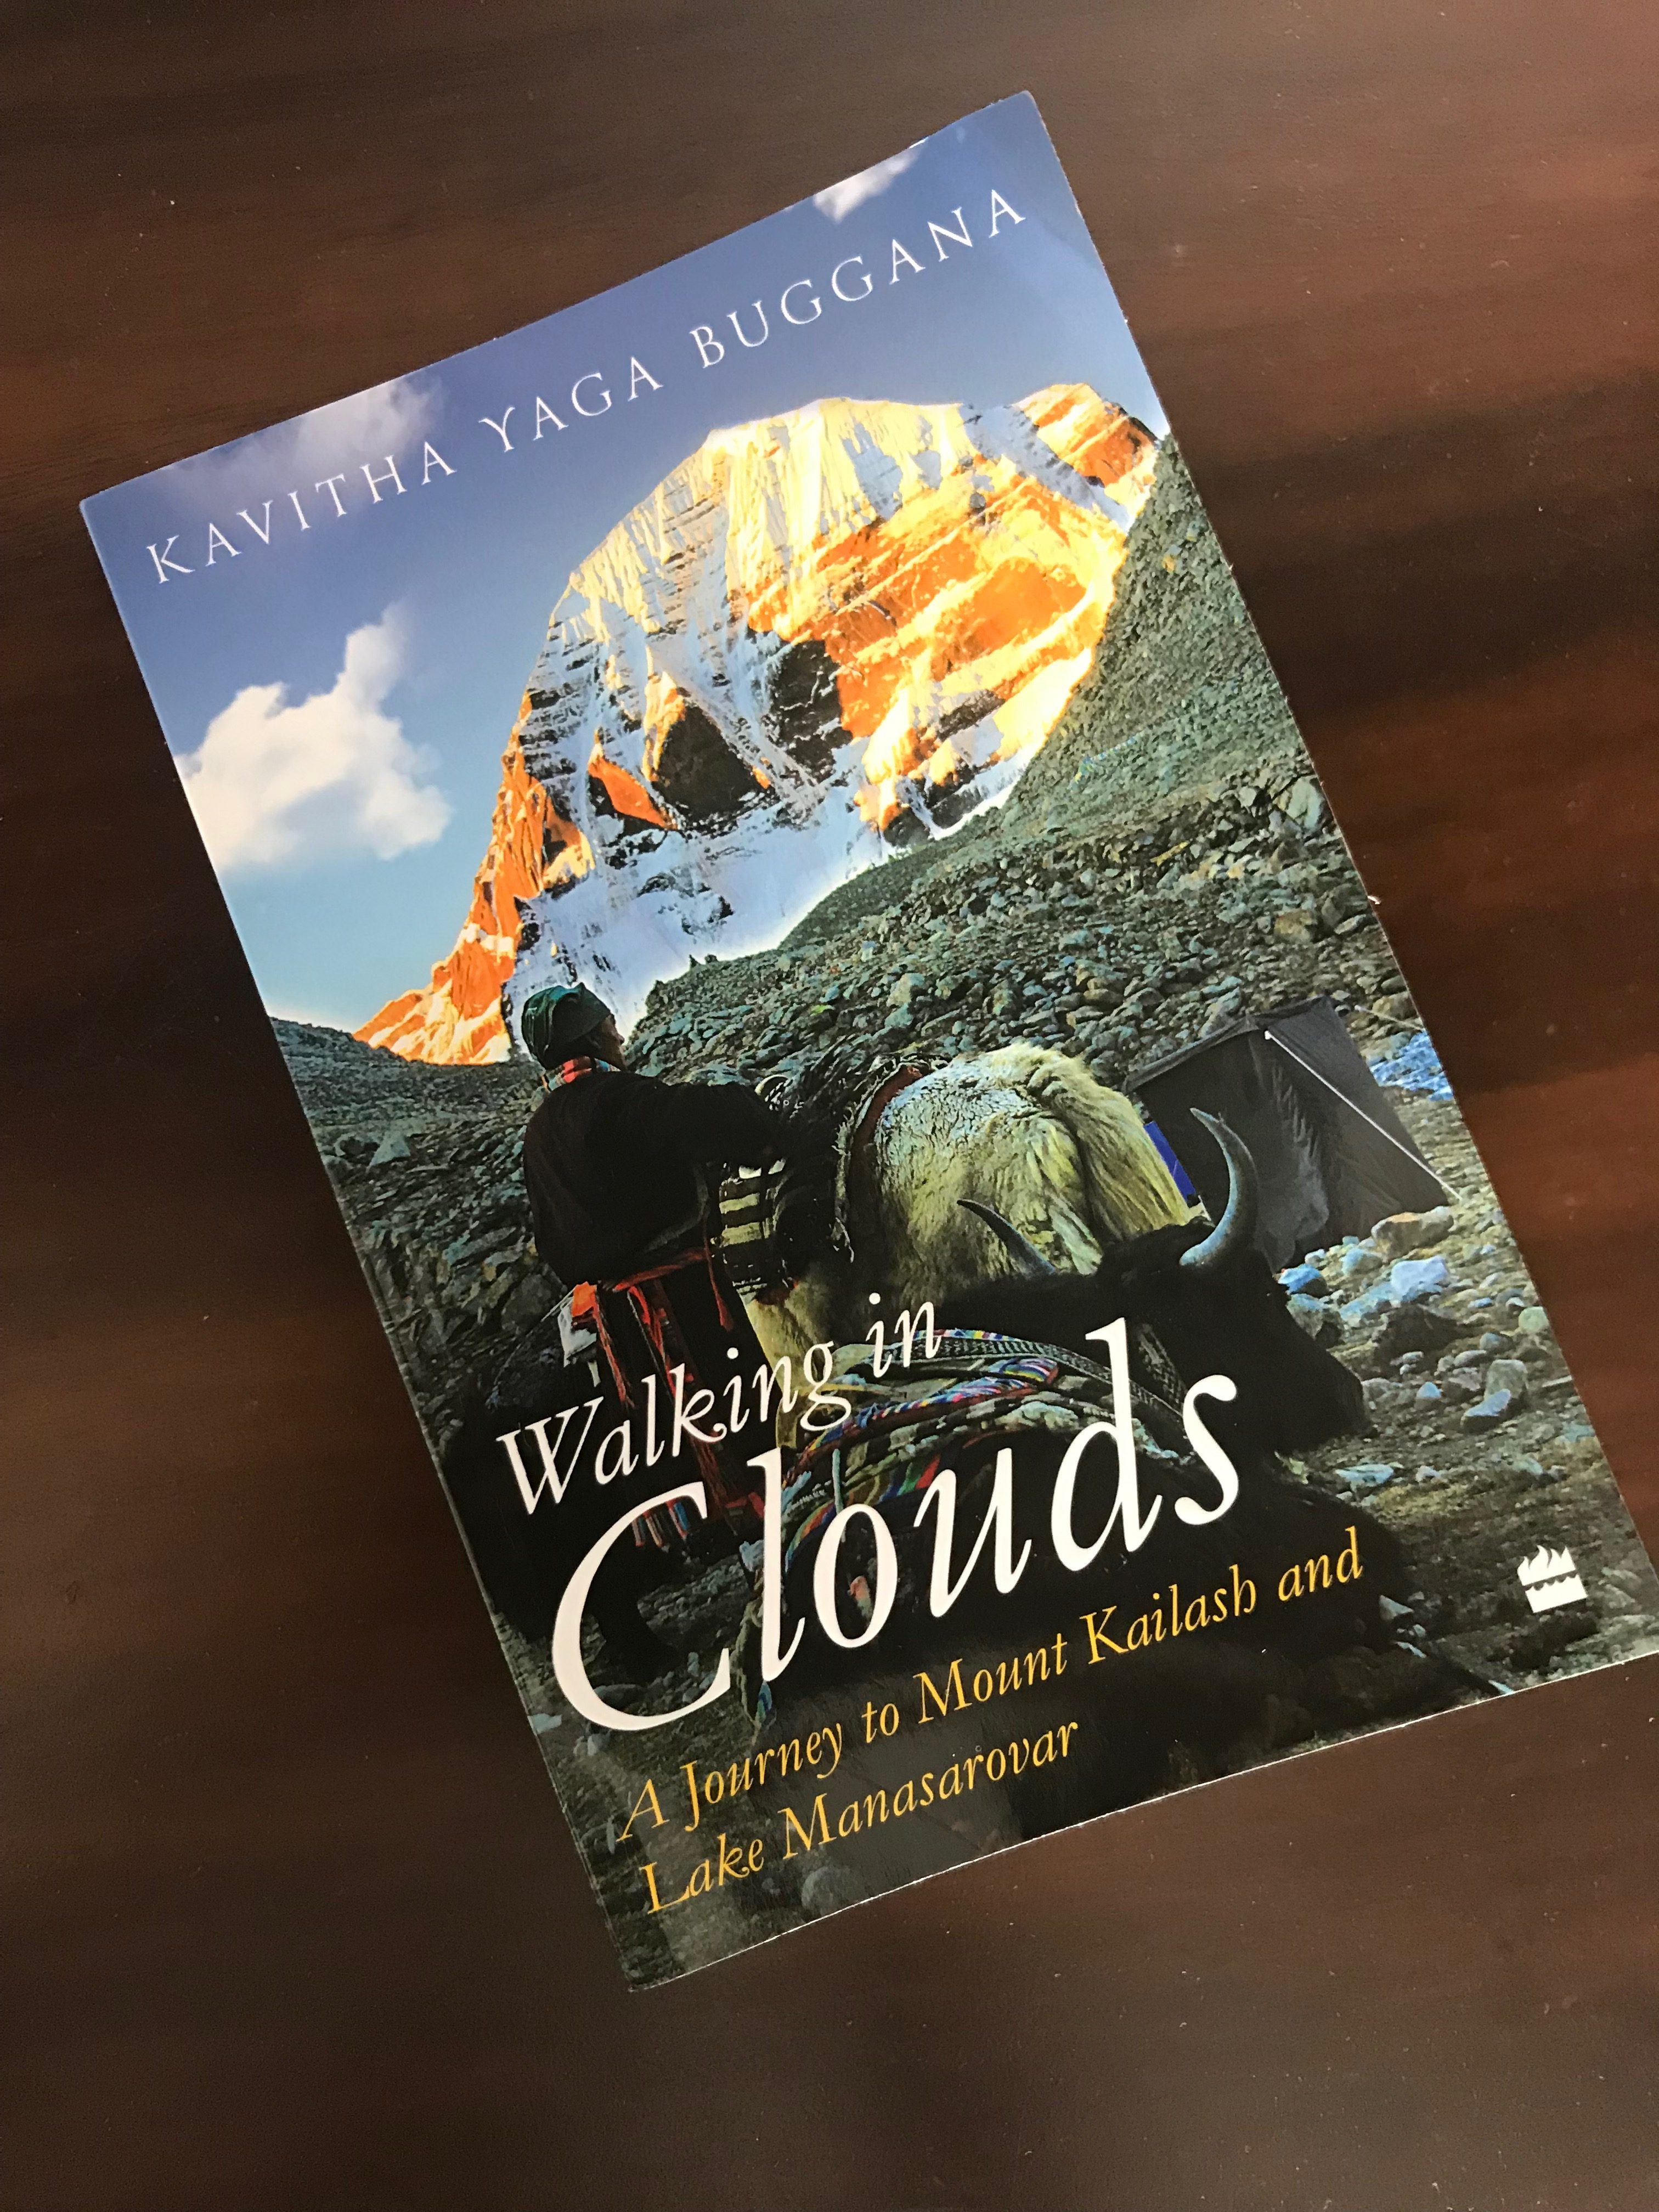 You are currently viewing Walking in Clouds – A journey to Mount Kailash and Lake Manasarovar by Kavitha Yaga Buggana